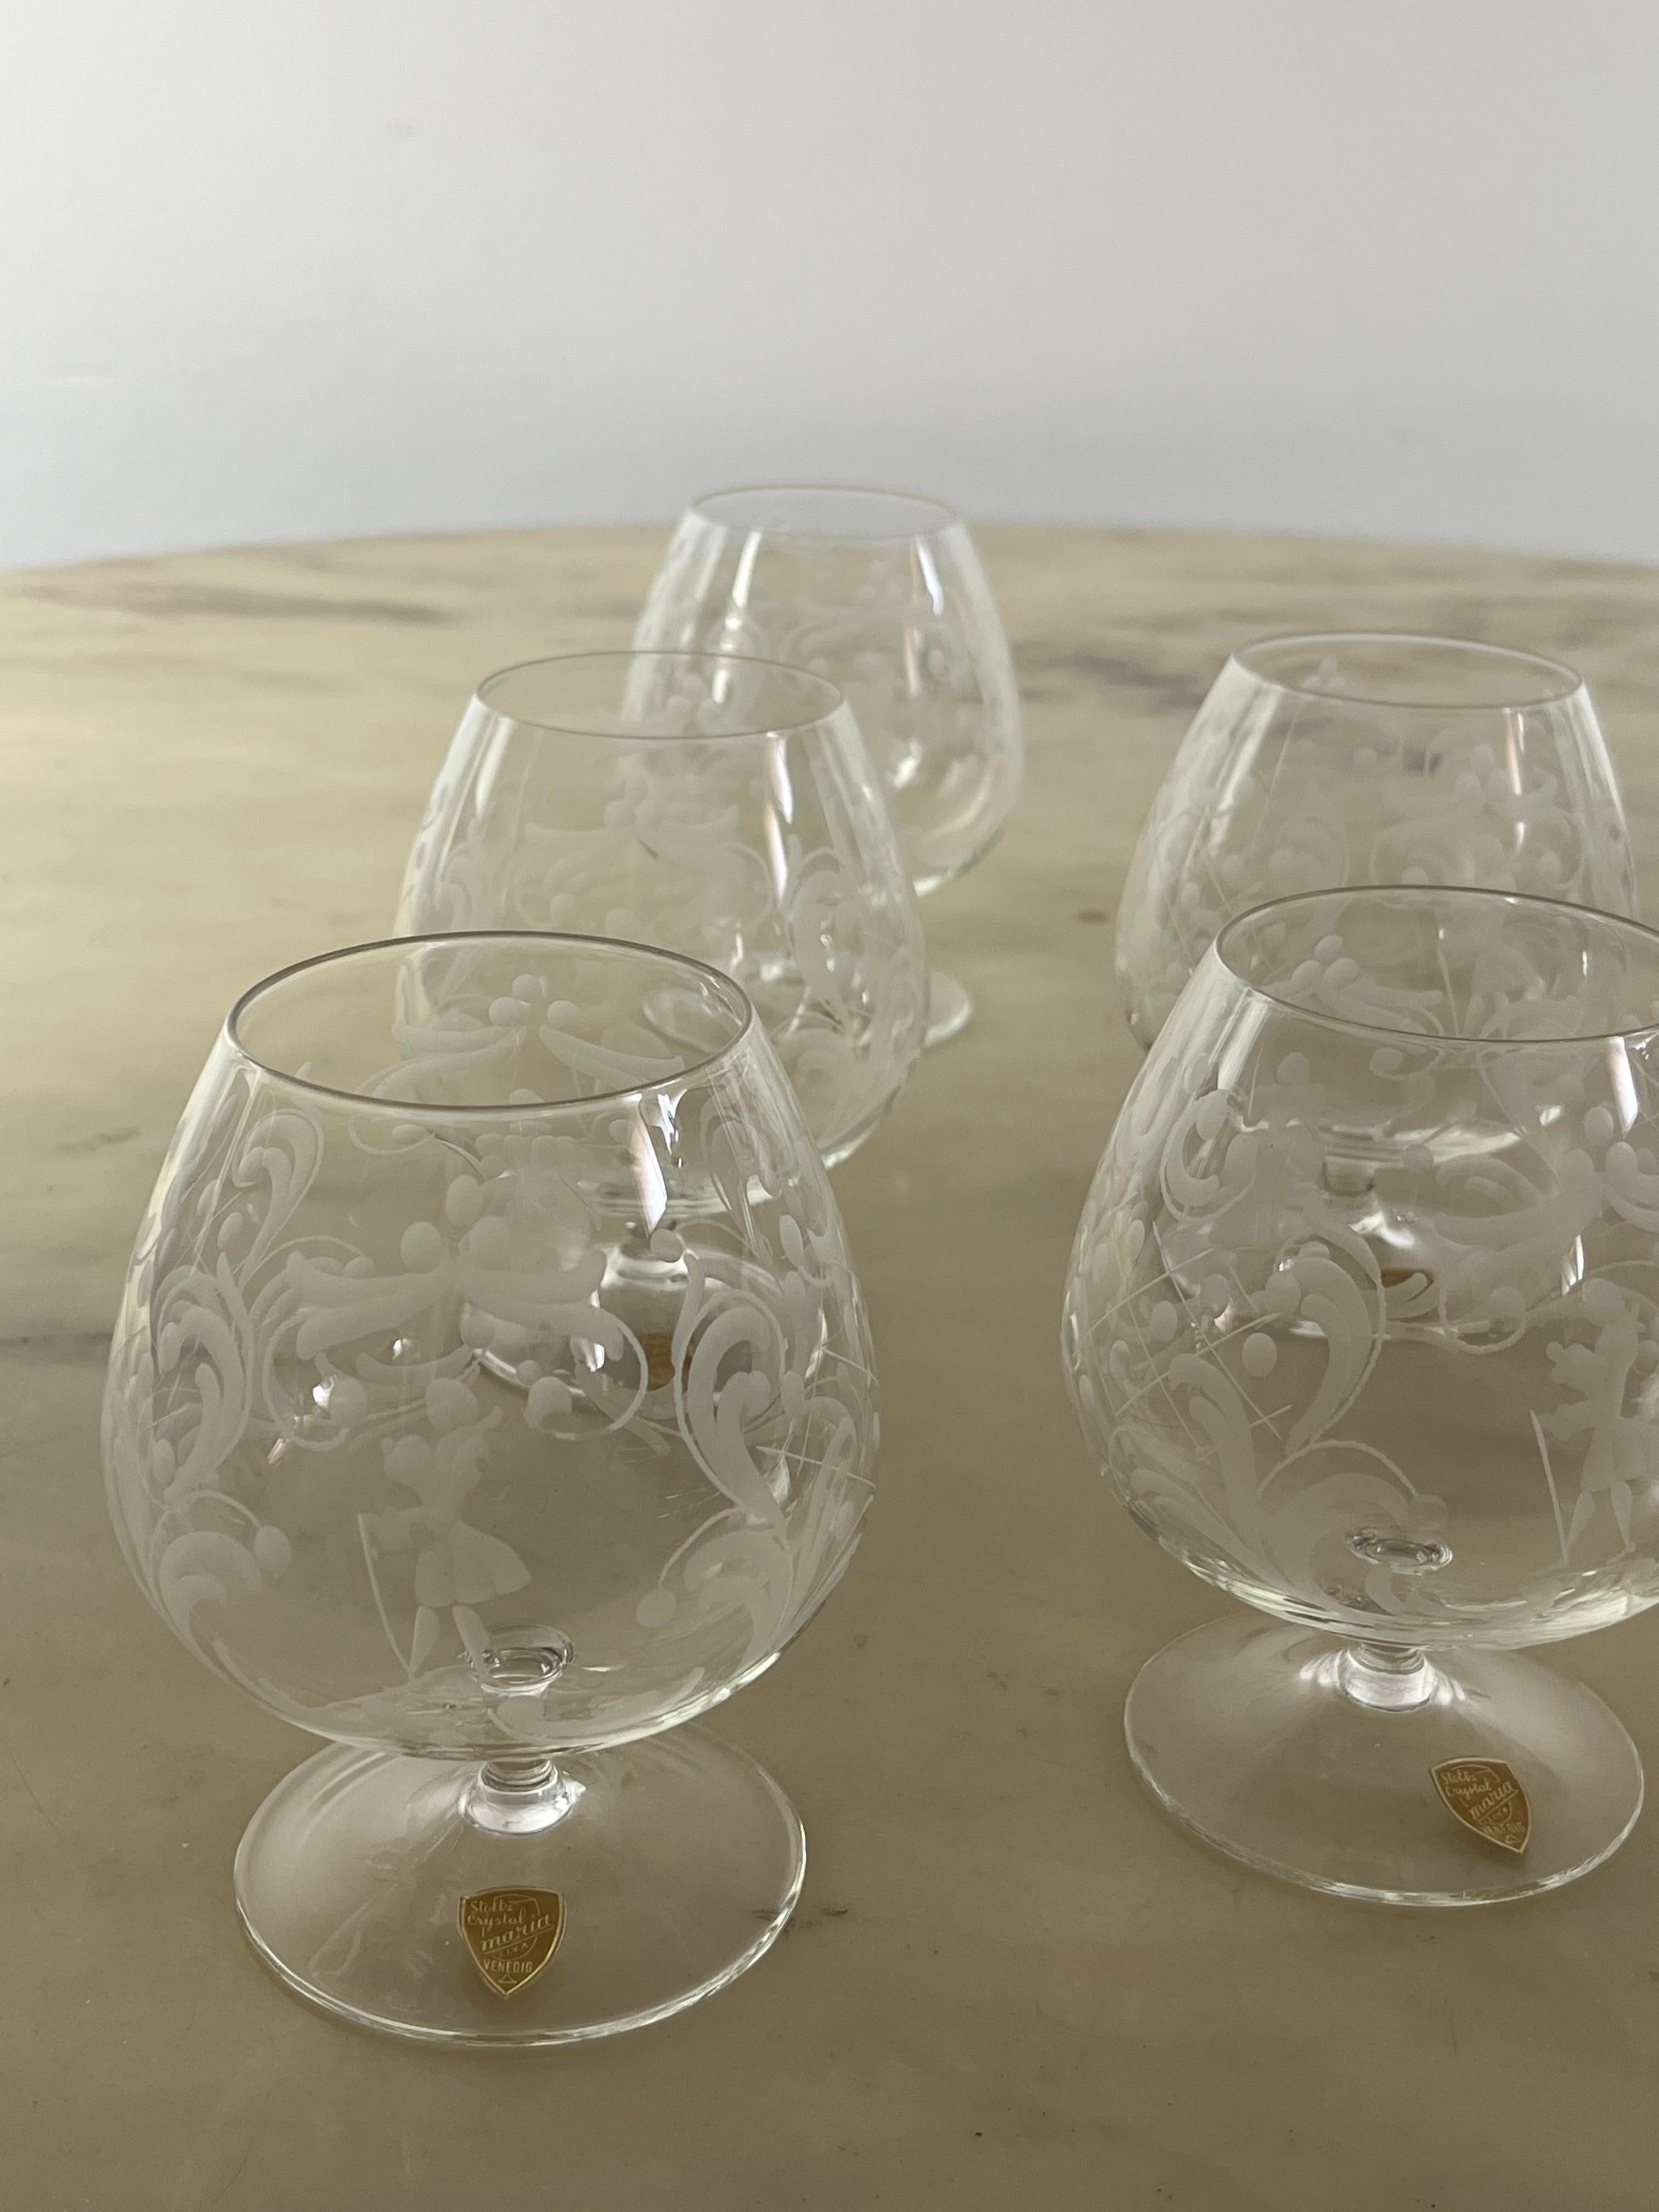 Six Cognac Glasses in Hand-Engraved Crystal, Venice, 1960s For Sale 1